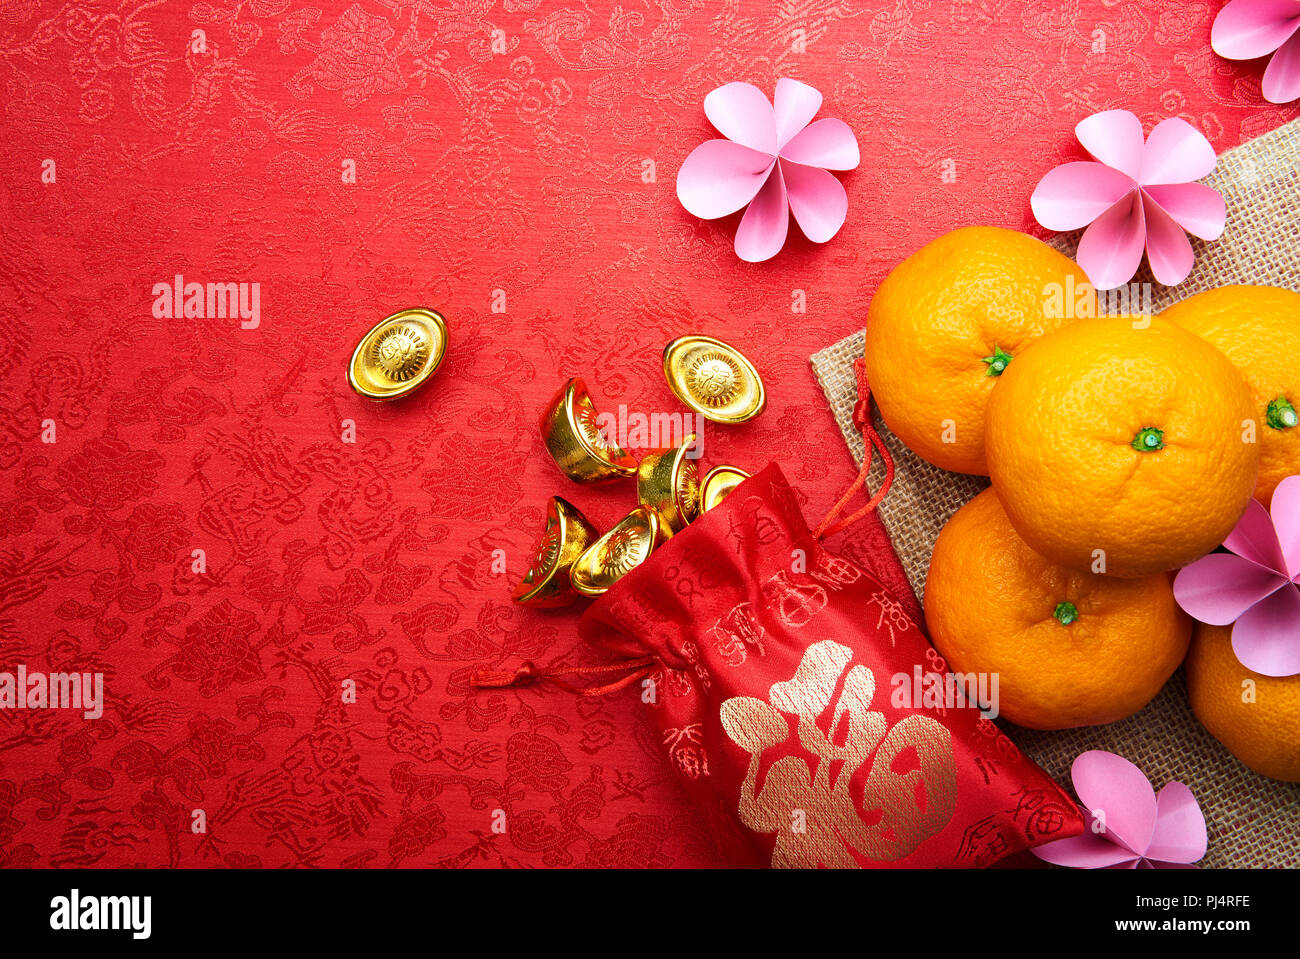 Chinese New Year decoration - Chinese calligraphy on gold sycee and red pouch means 'Prosperity' Stock Photo